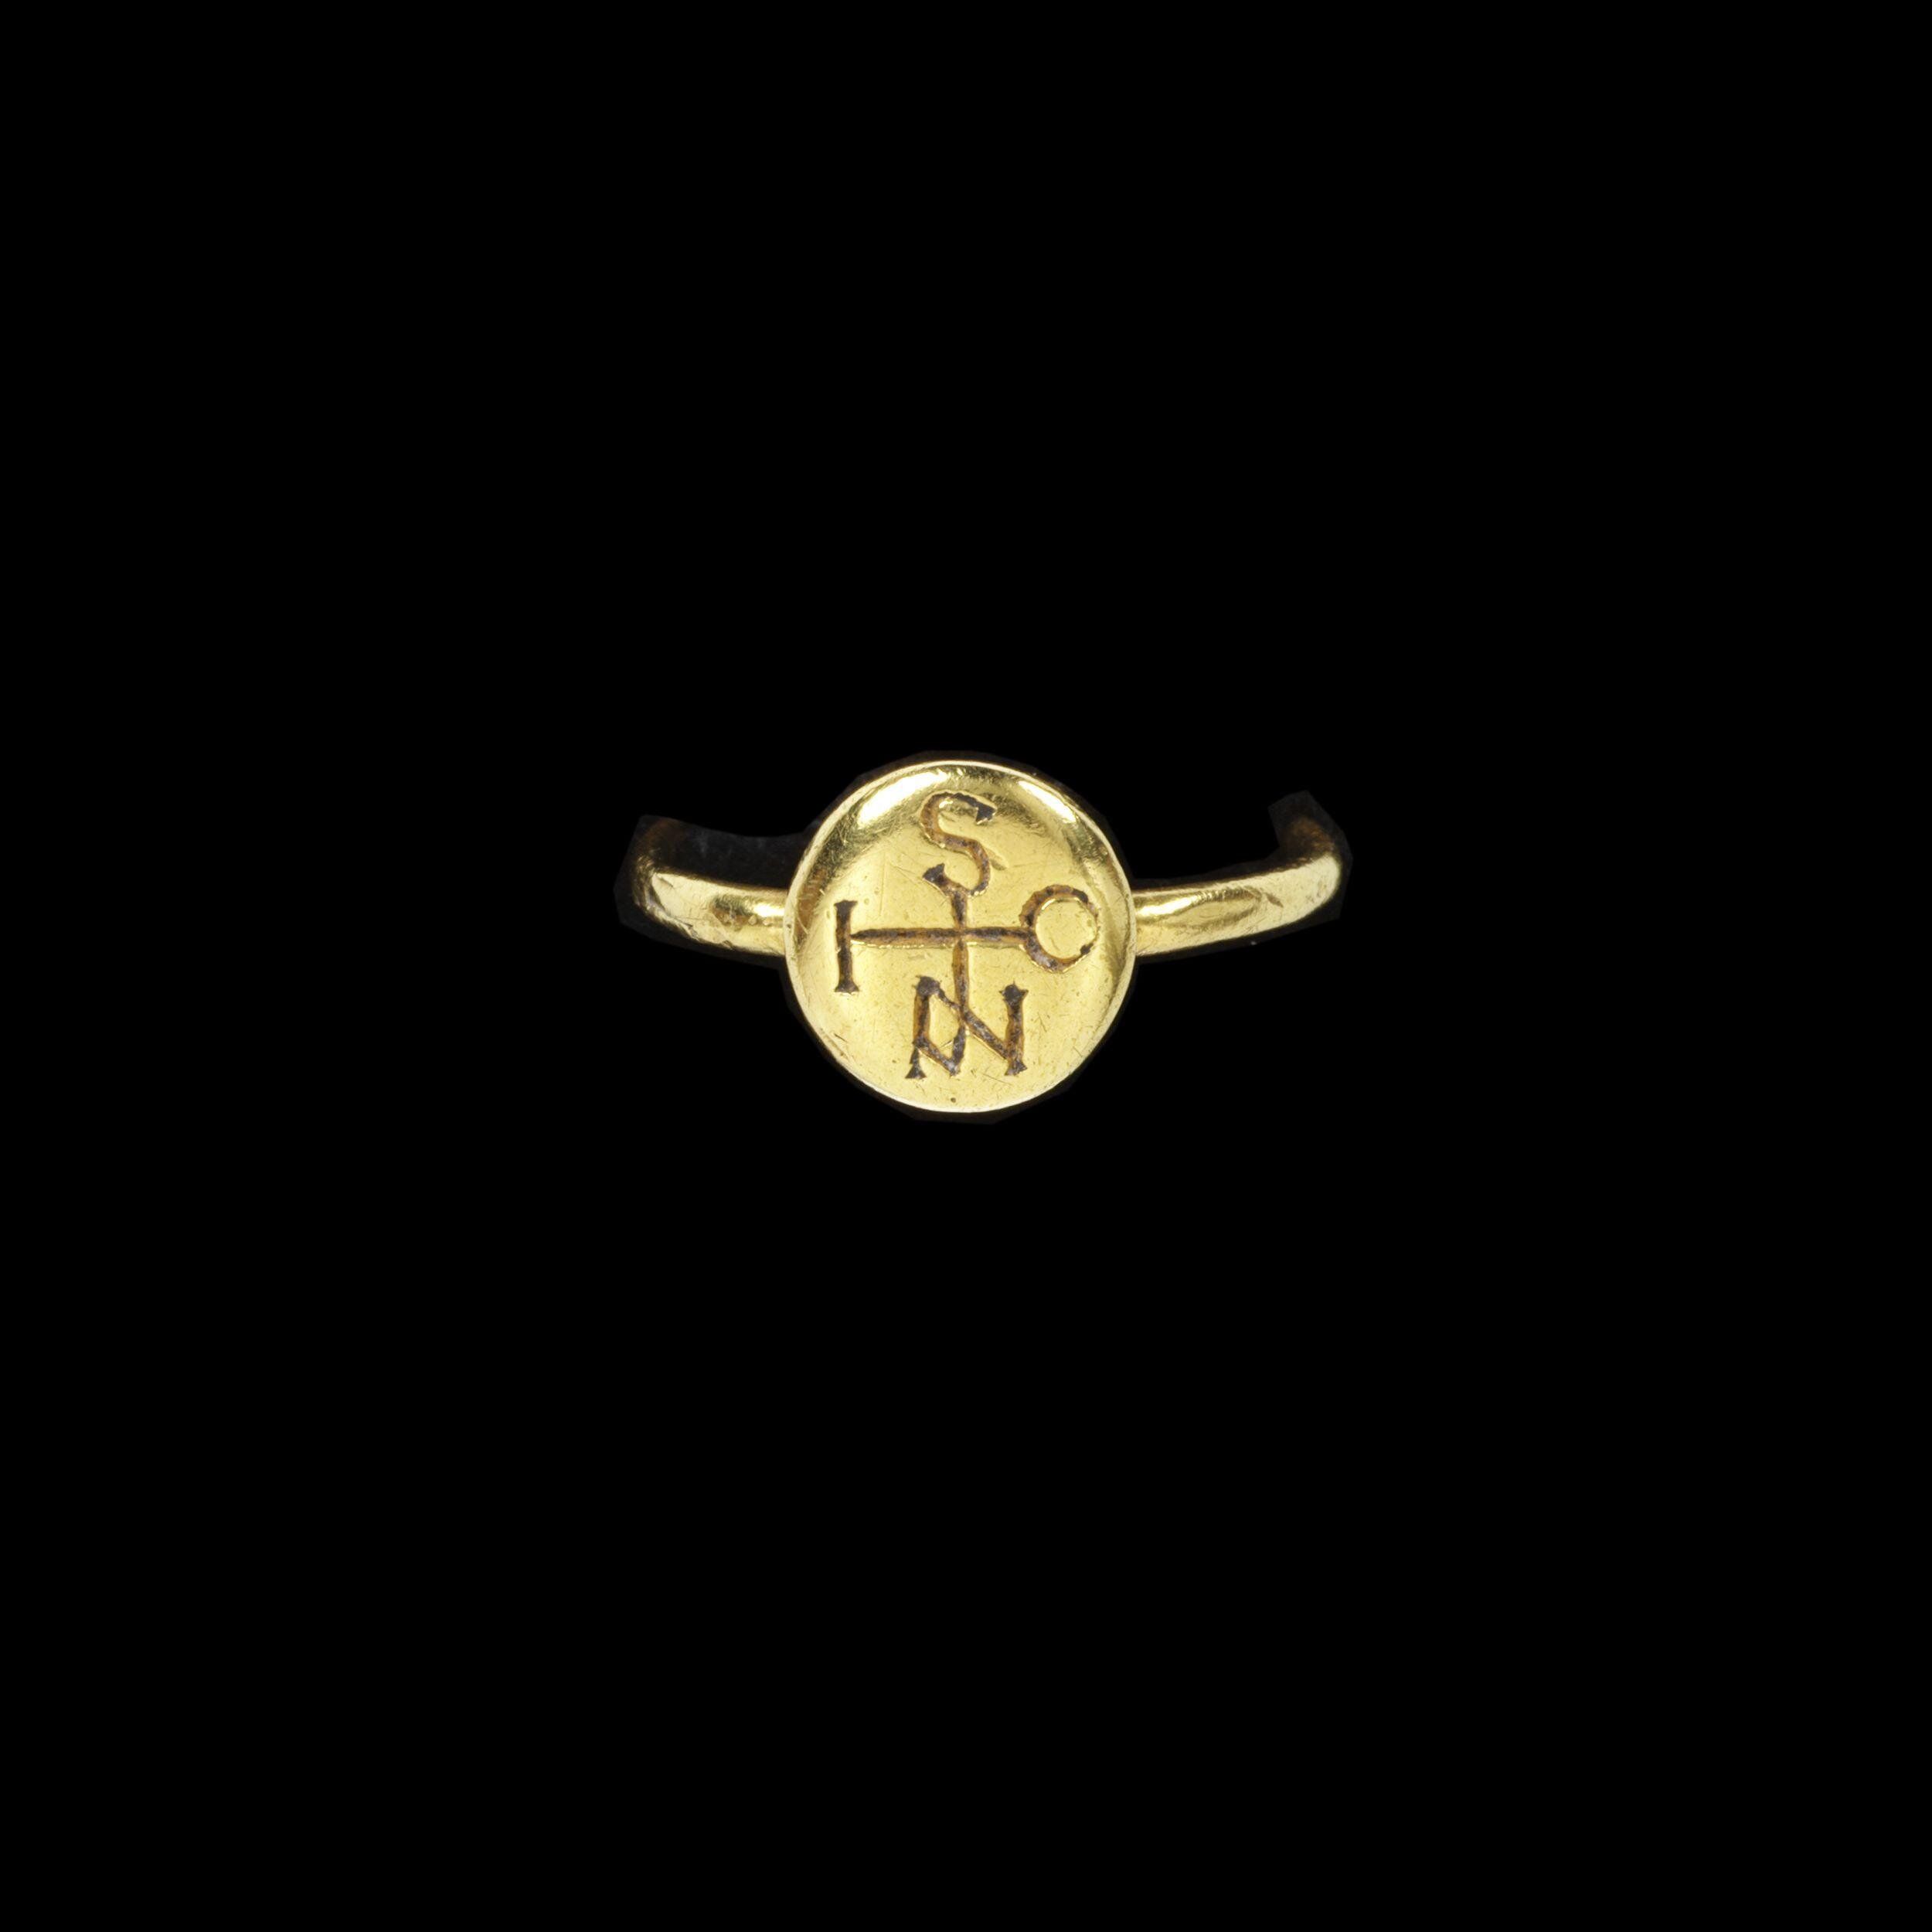 Cross monogram ring spelling "IOANIS" or John, made in the 6th-7th century. The Victoria & Albert Museum.